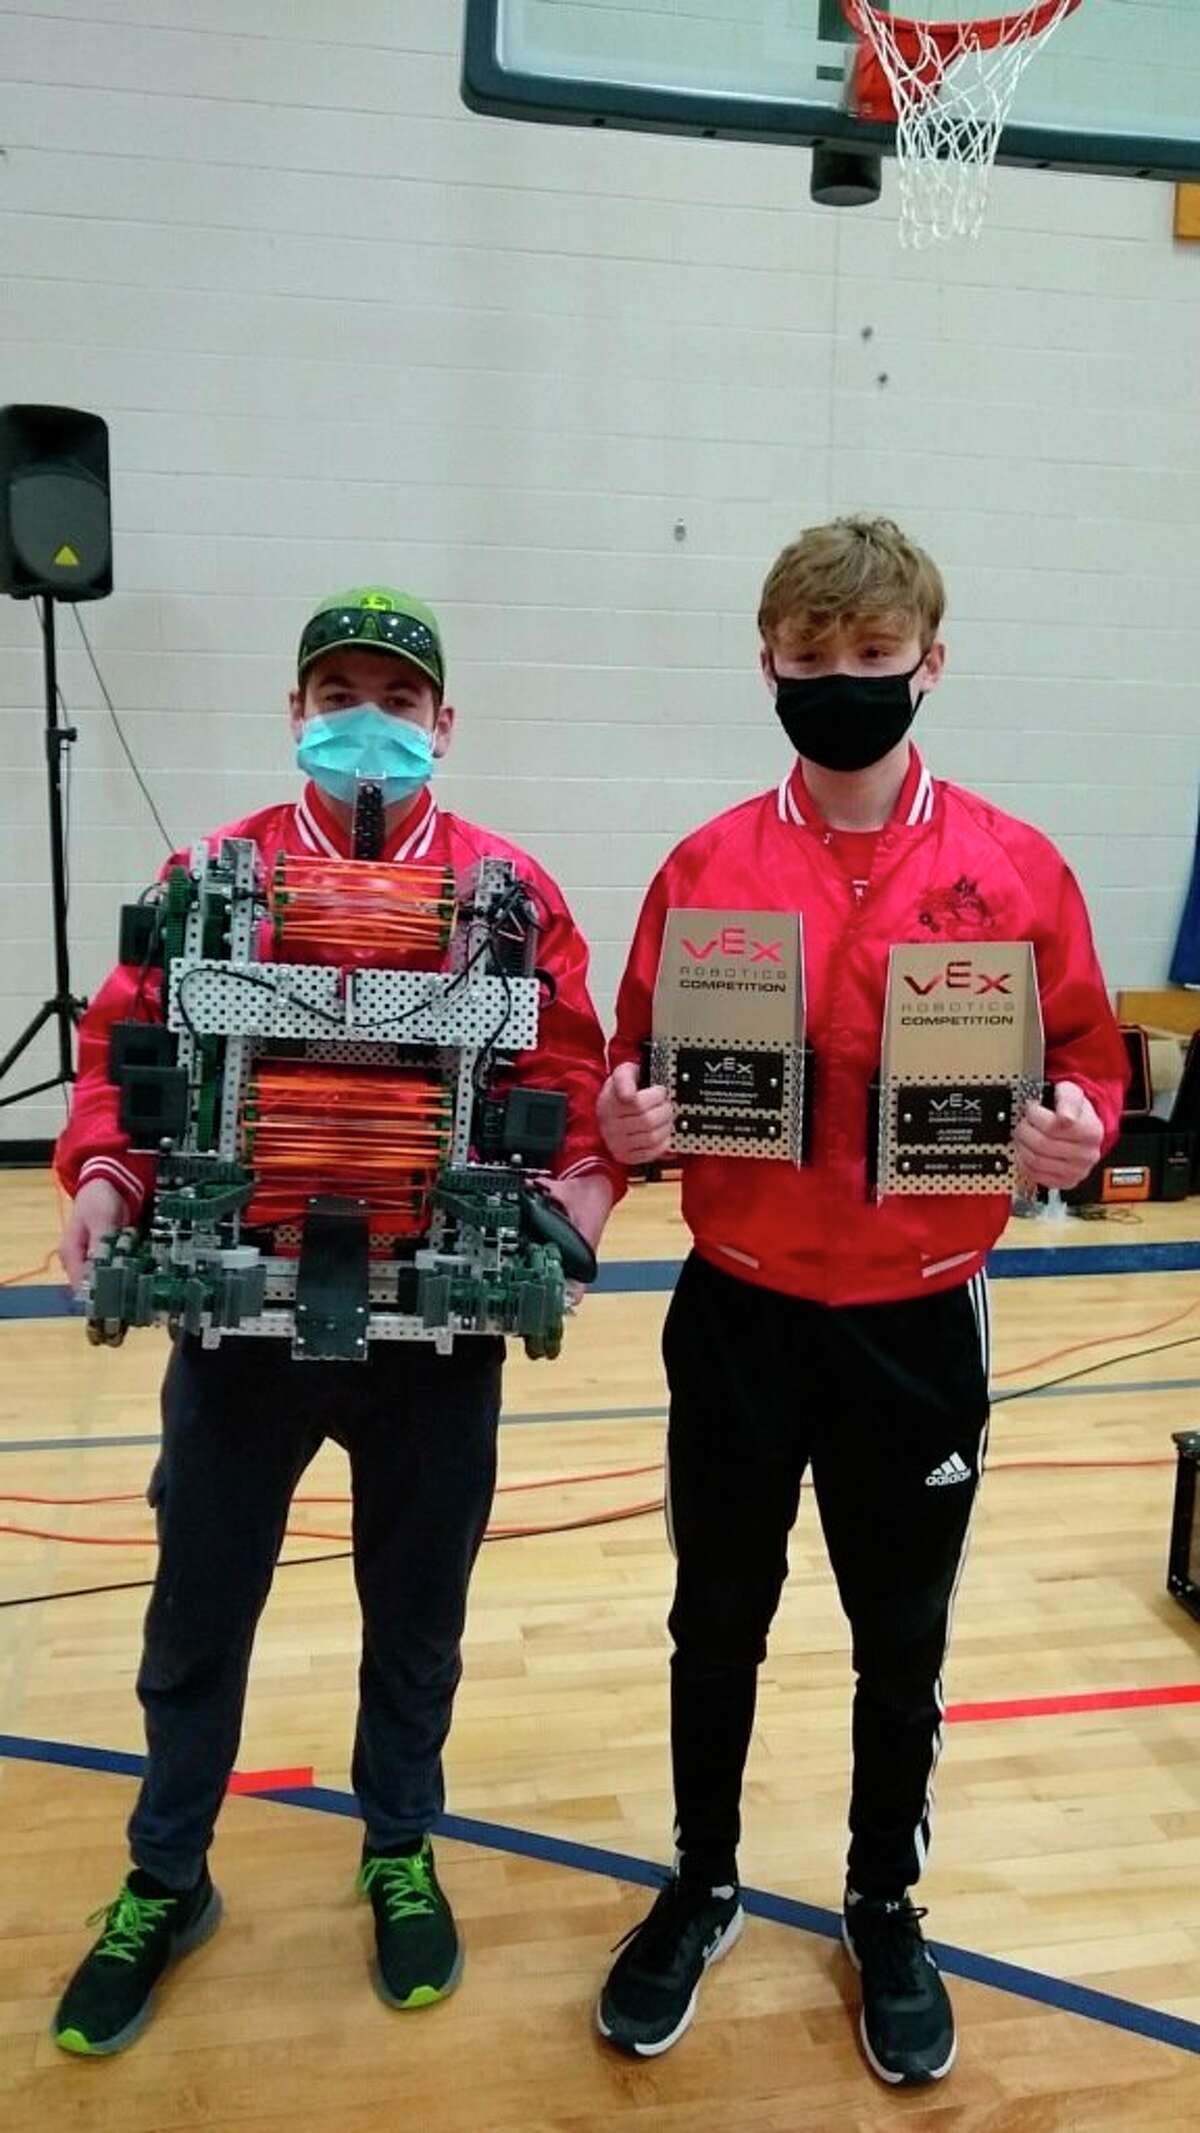 David McGee and Emmett Jaquish won were tournament champions at a VEX Robotics Challenge in Traverse City, which took place at the same time the VEX IQ challenge was happening at Benzie Central High School. (Courtesy Photo)